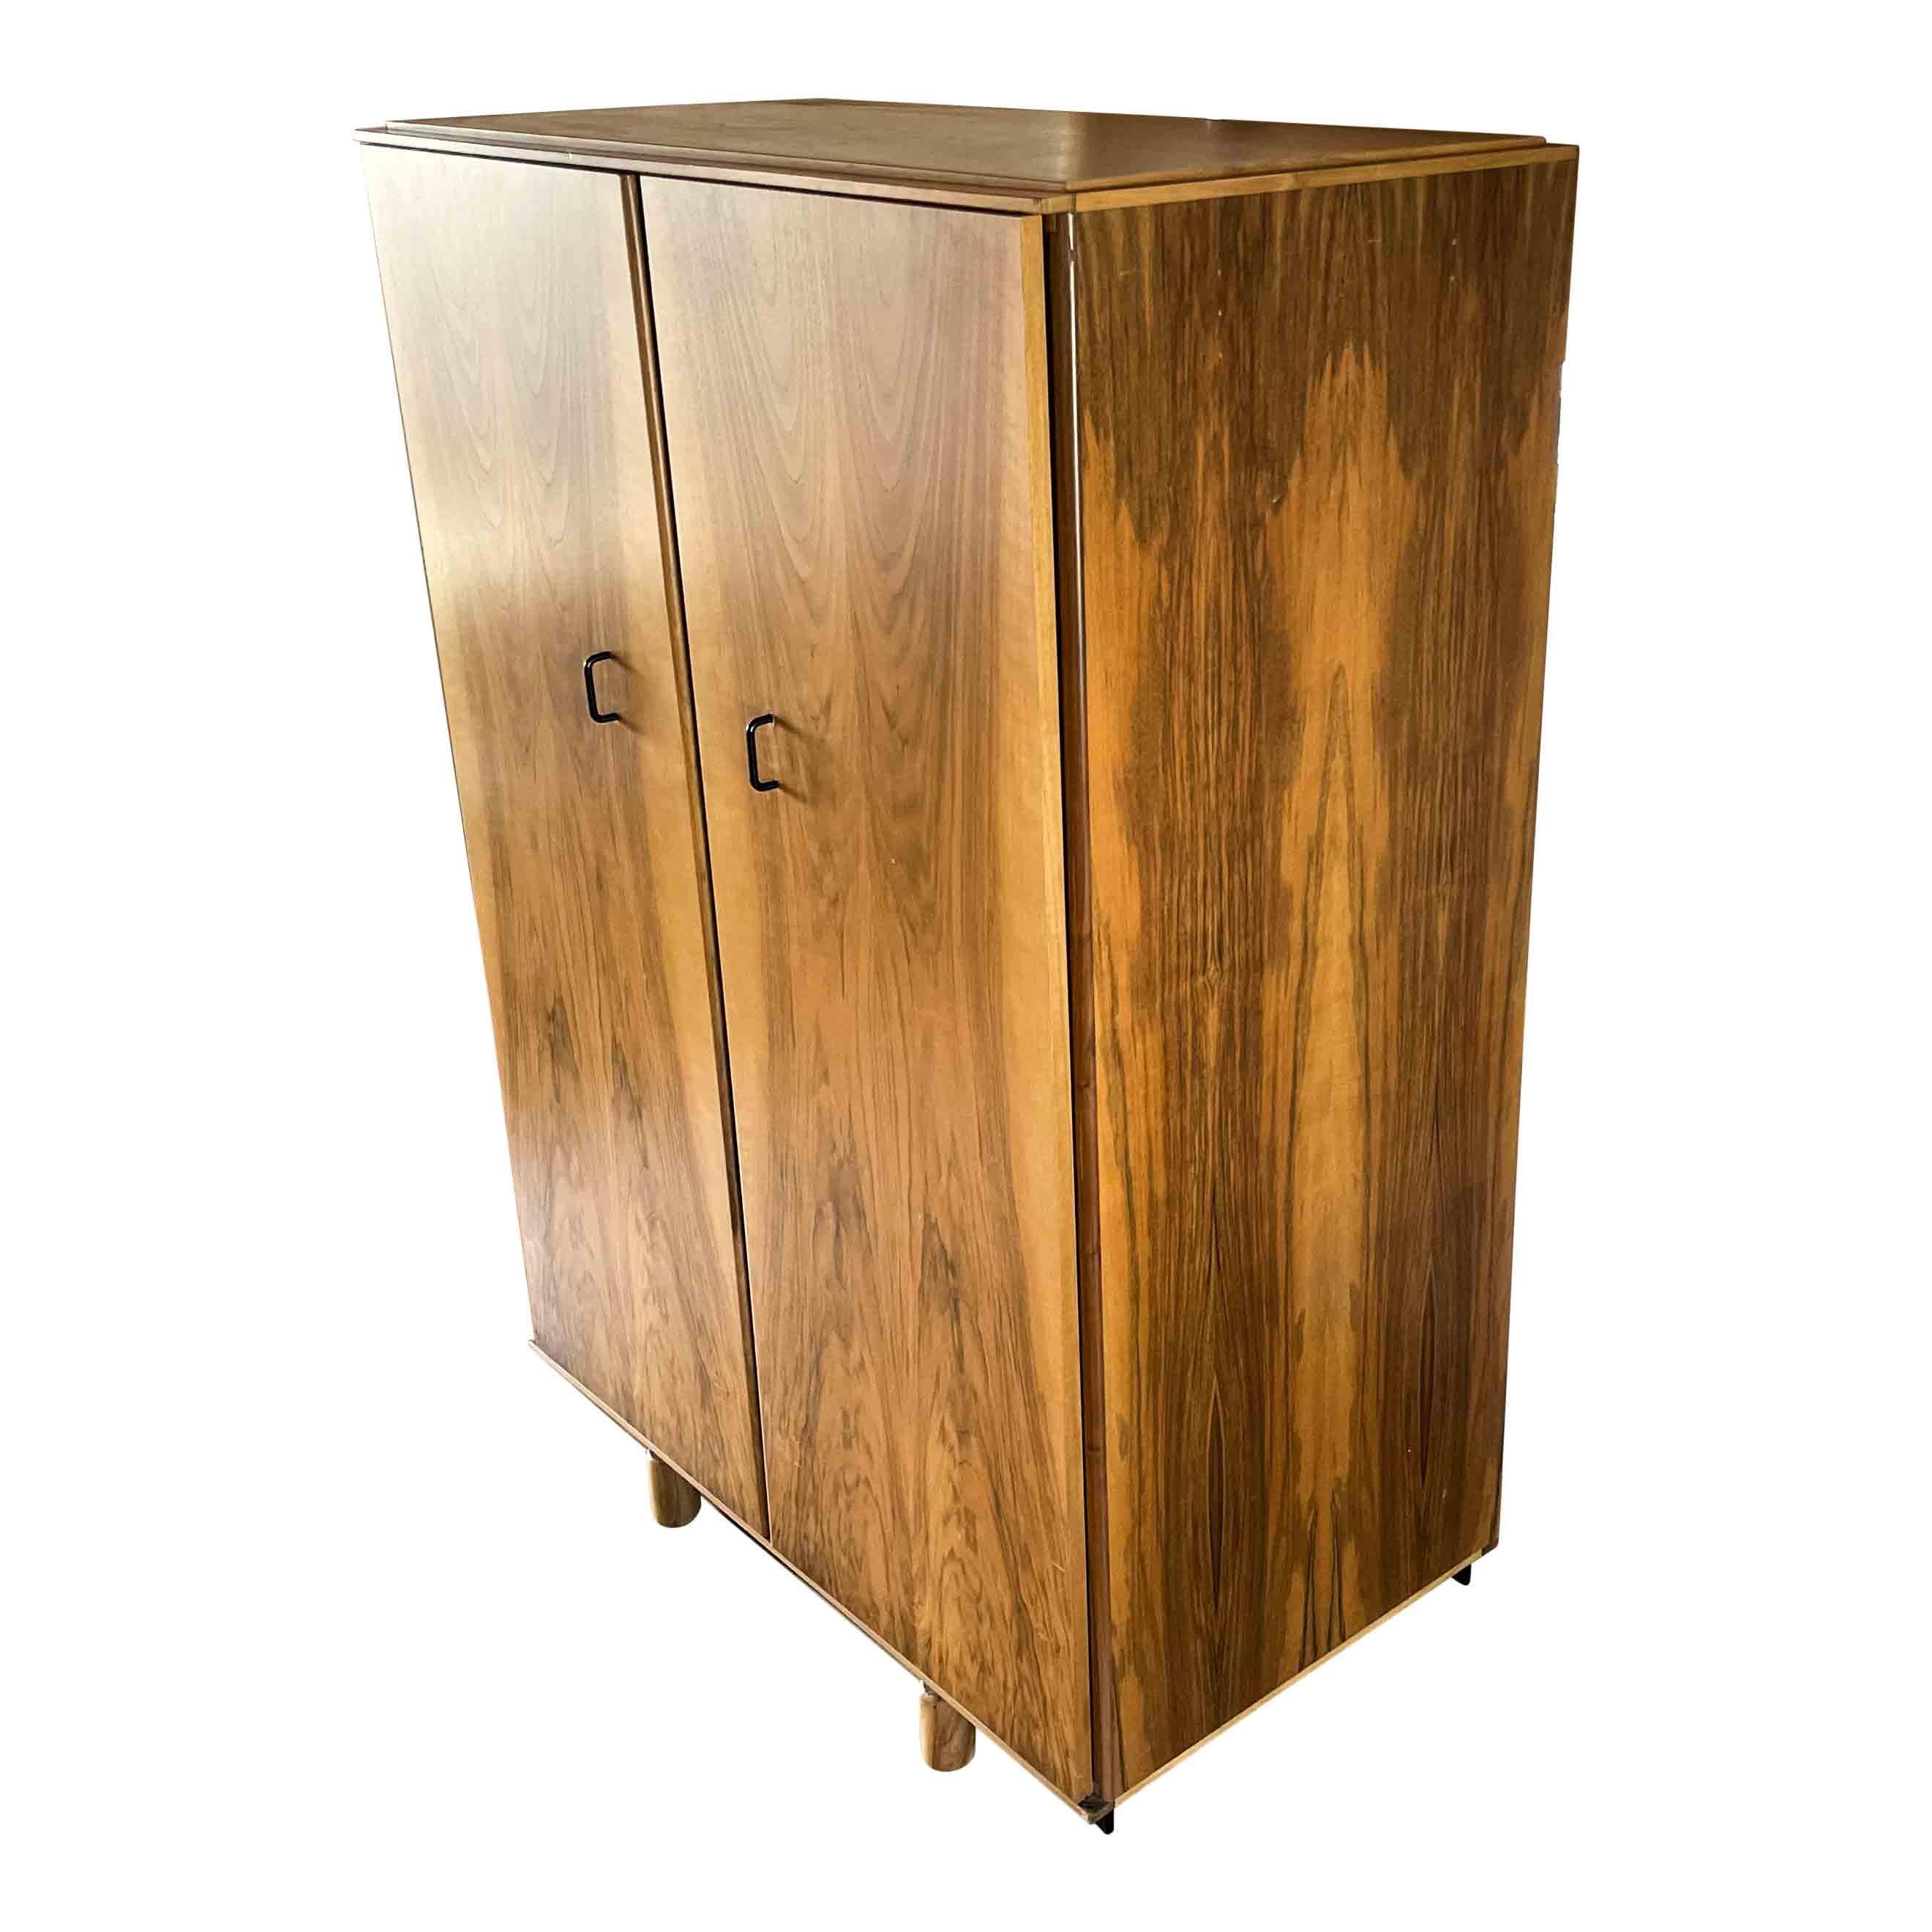 813 wardrobe, from the “Ovunque” series, designed by Gianfranco Frattini, and produced by the Italian manufacturer Bernini in 1981.

Made of walnut.

Excellent vintage condition.

Gianfranco Frattini (May 15, 1926 – April 6, 2004) was an Italian